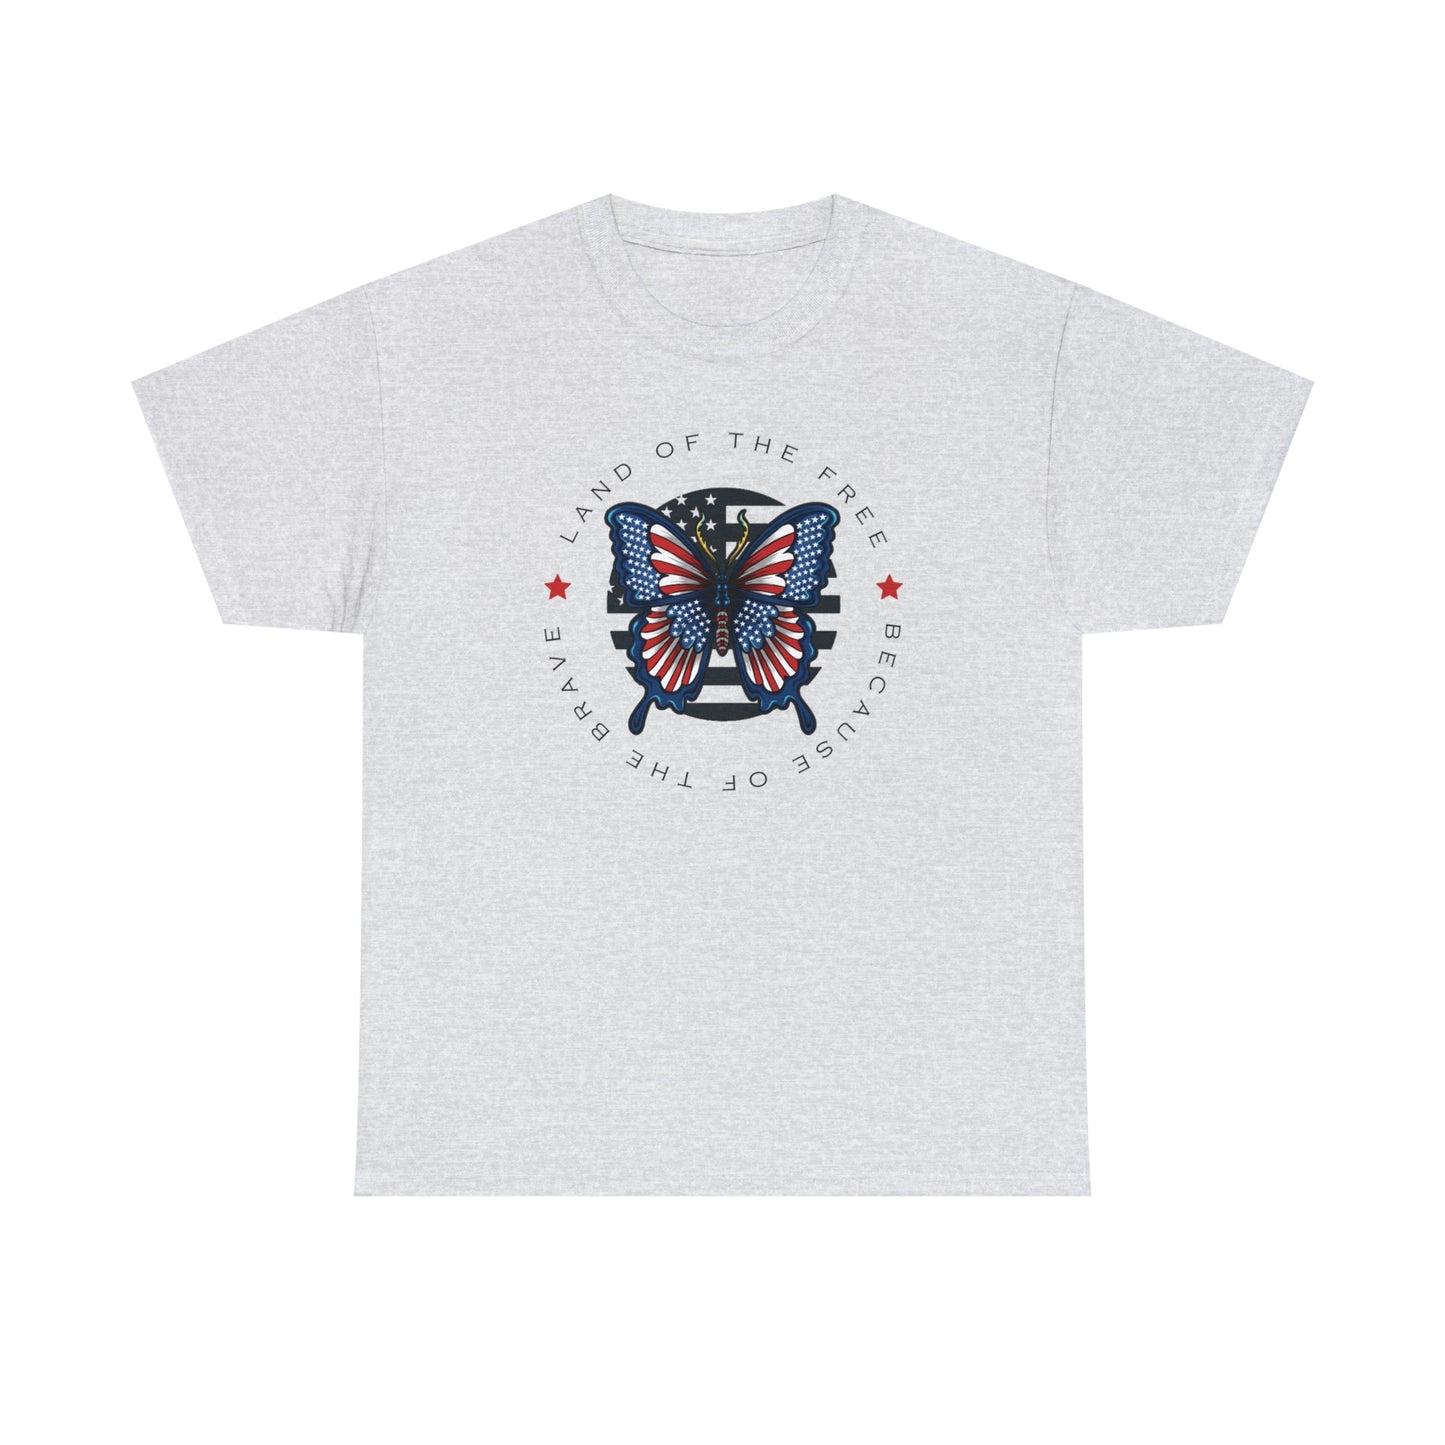 Patriotic T-Shirt For Conservative TShirt For 4th Of July T Shirt For Independence Day Shirt For Patriotic Gift Butterfly T-Shirt For Gift